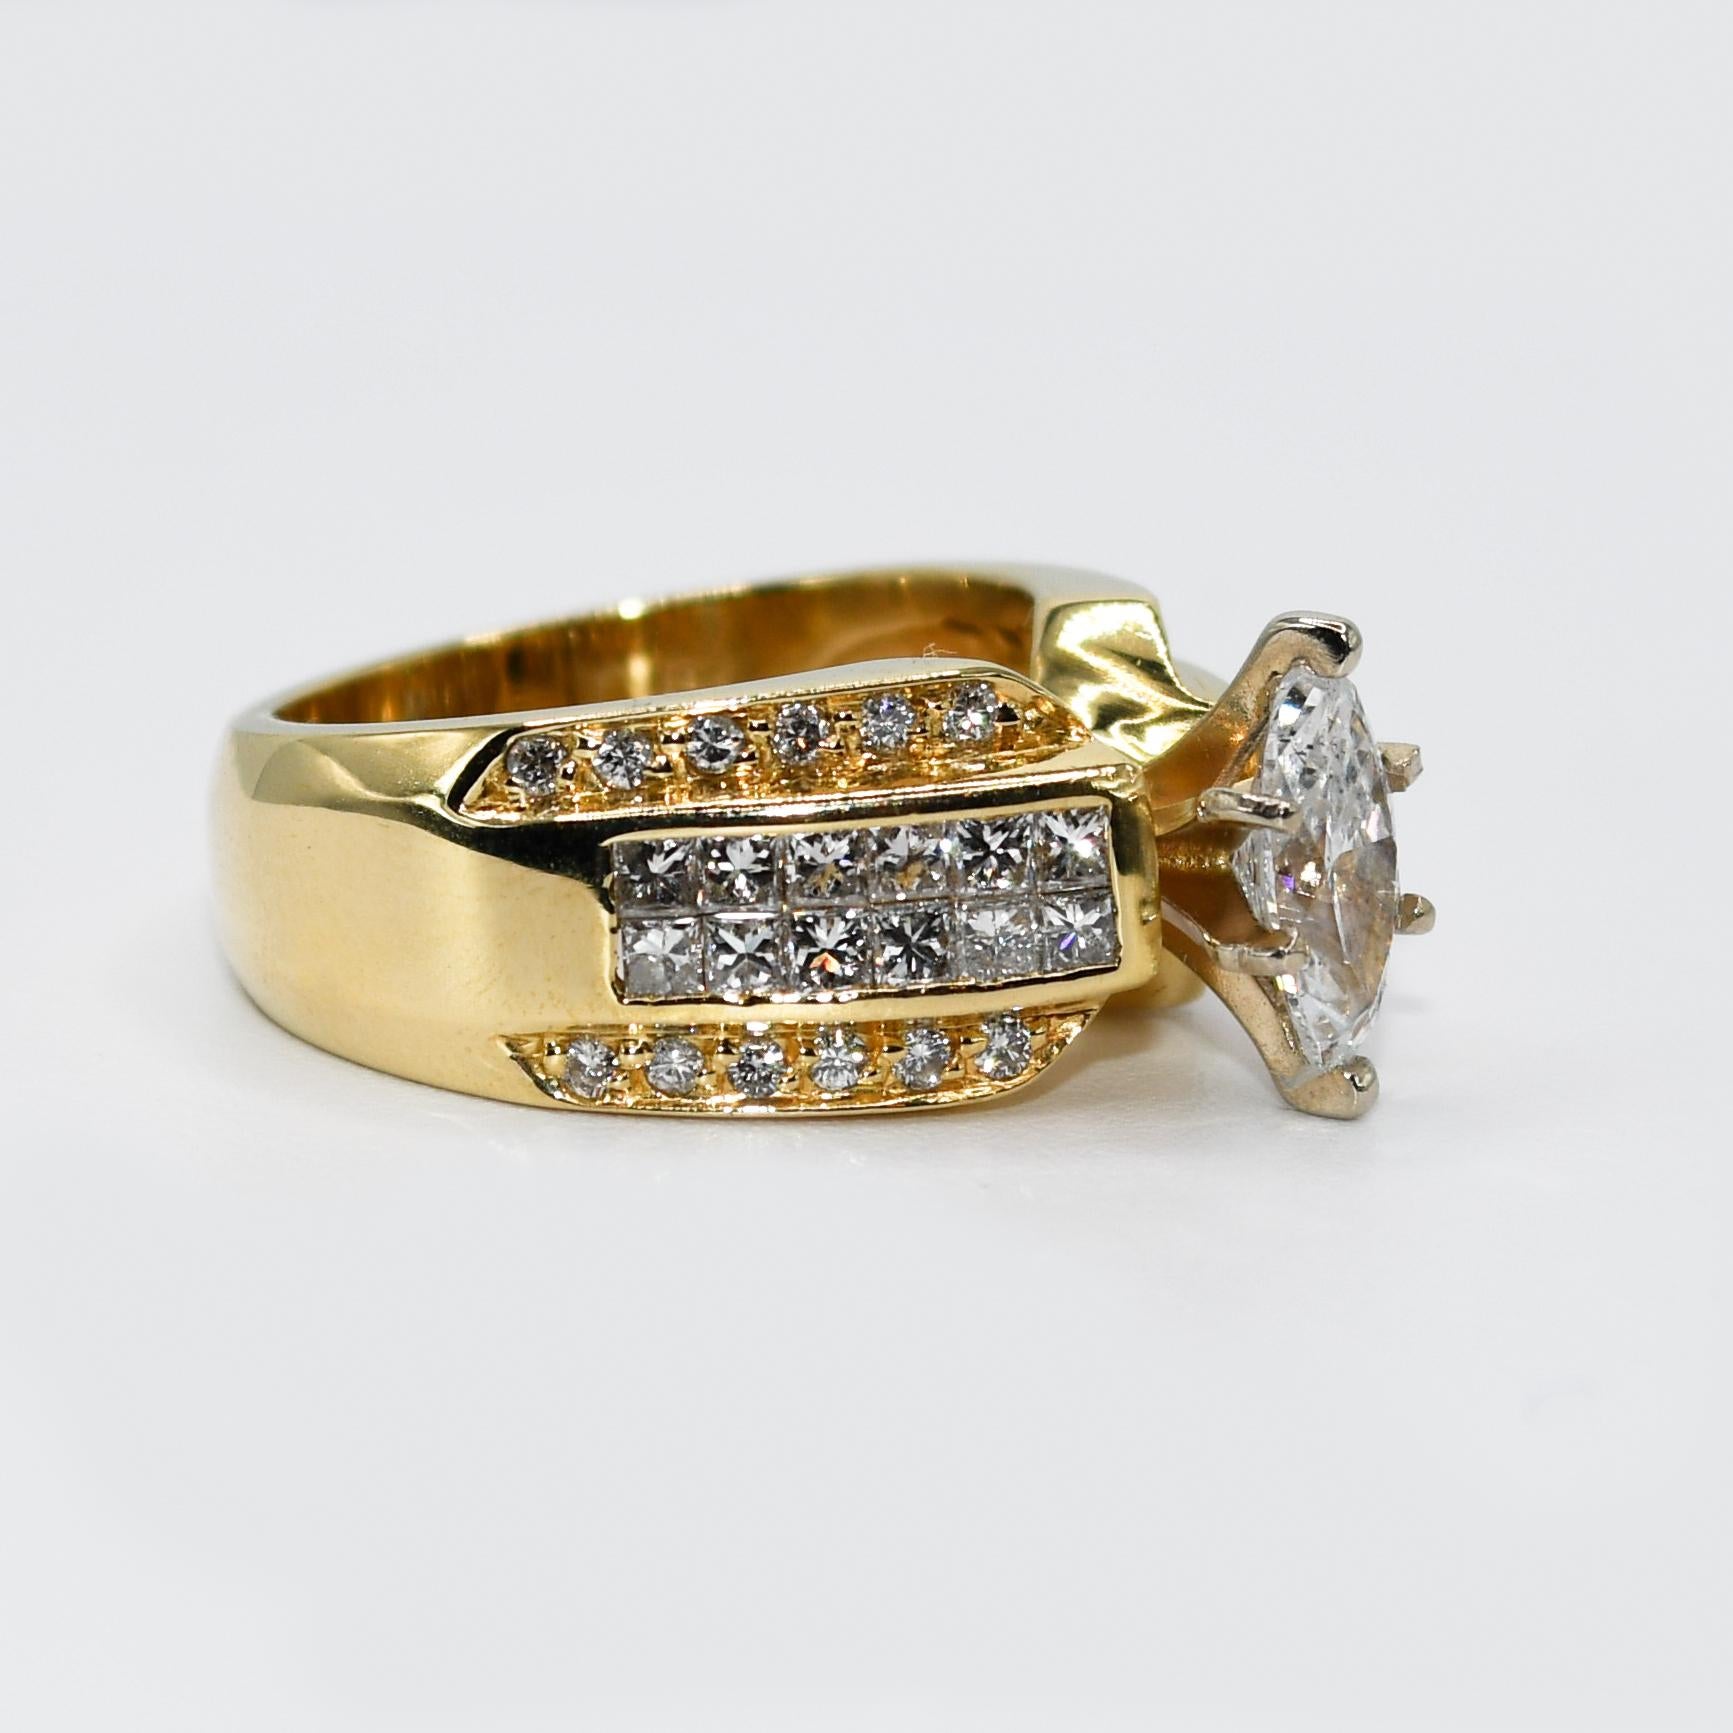 18K Yellow Gold Diamond Ring, .98ct, Marquise 1.98tdw, 11.8g

Ladies diamond engagement ring in 18k yellow gold setting. Stamped 18k and weighs 11.8 grams.
The center diamond is a marquise shape weighing .98 carats, F to G color, i1 clarity.
On the